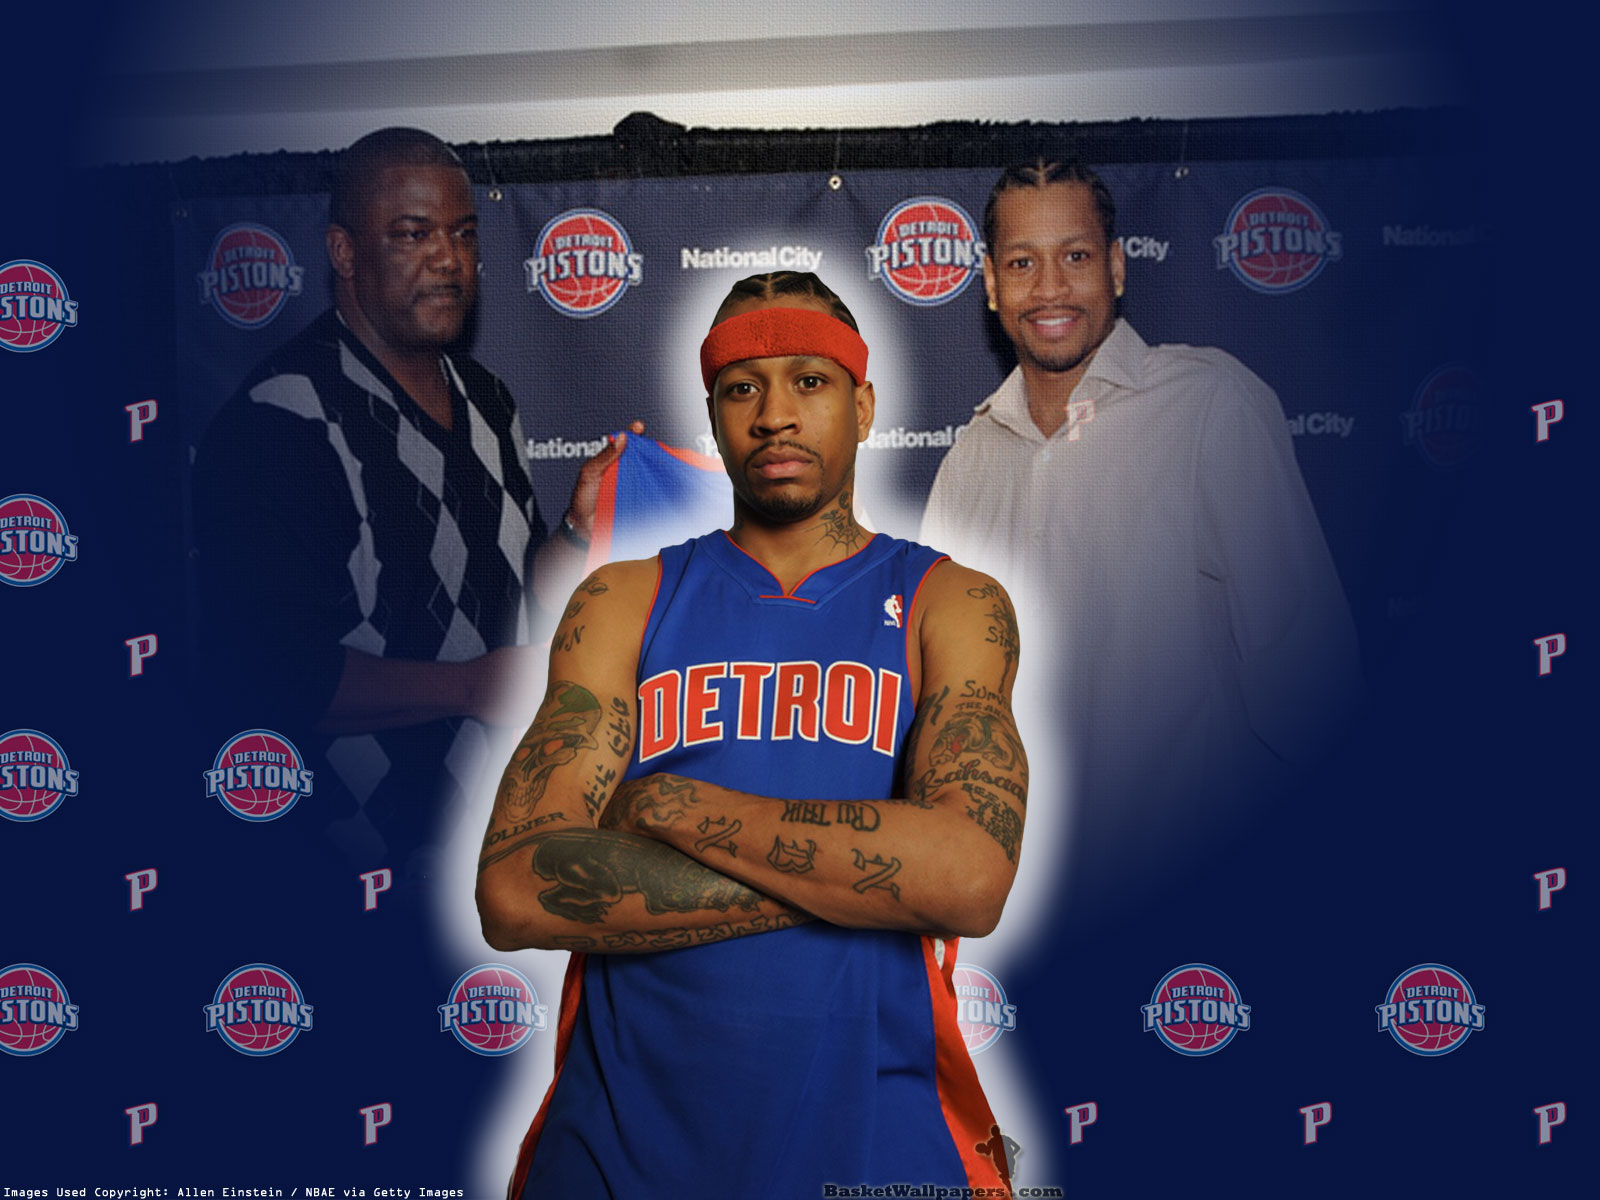  Detroit and for today i have made wallpaper of Allen Iverson in Pistons 